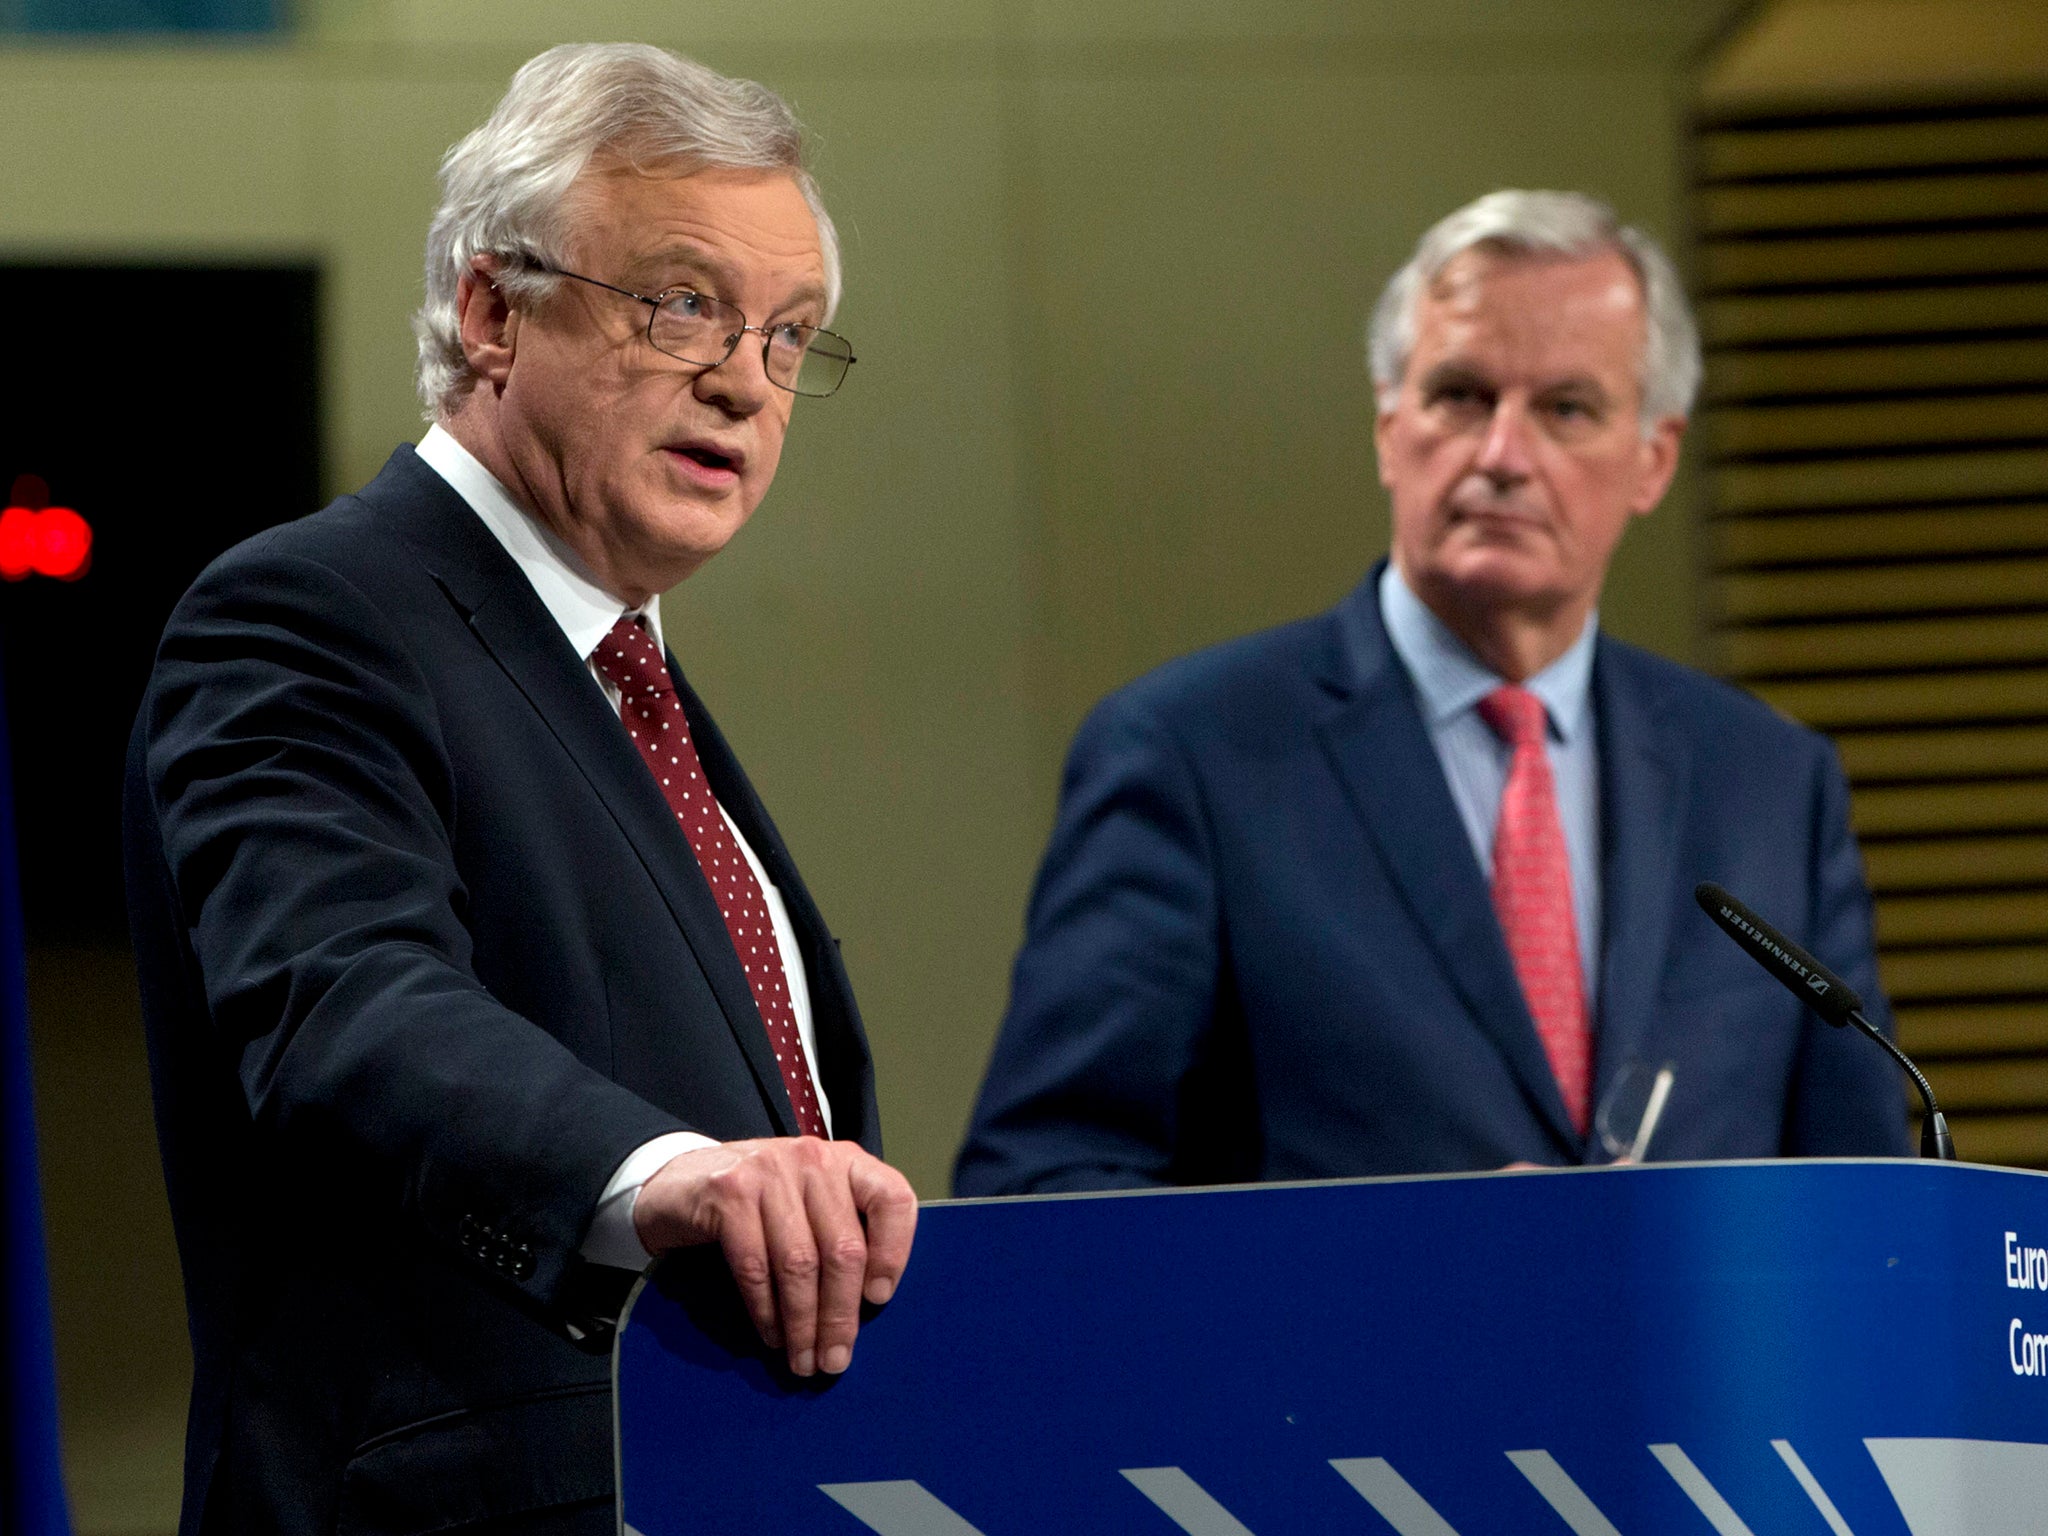 Michel Barnier and David Davis during a conference at the EU headquarters in Brussels